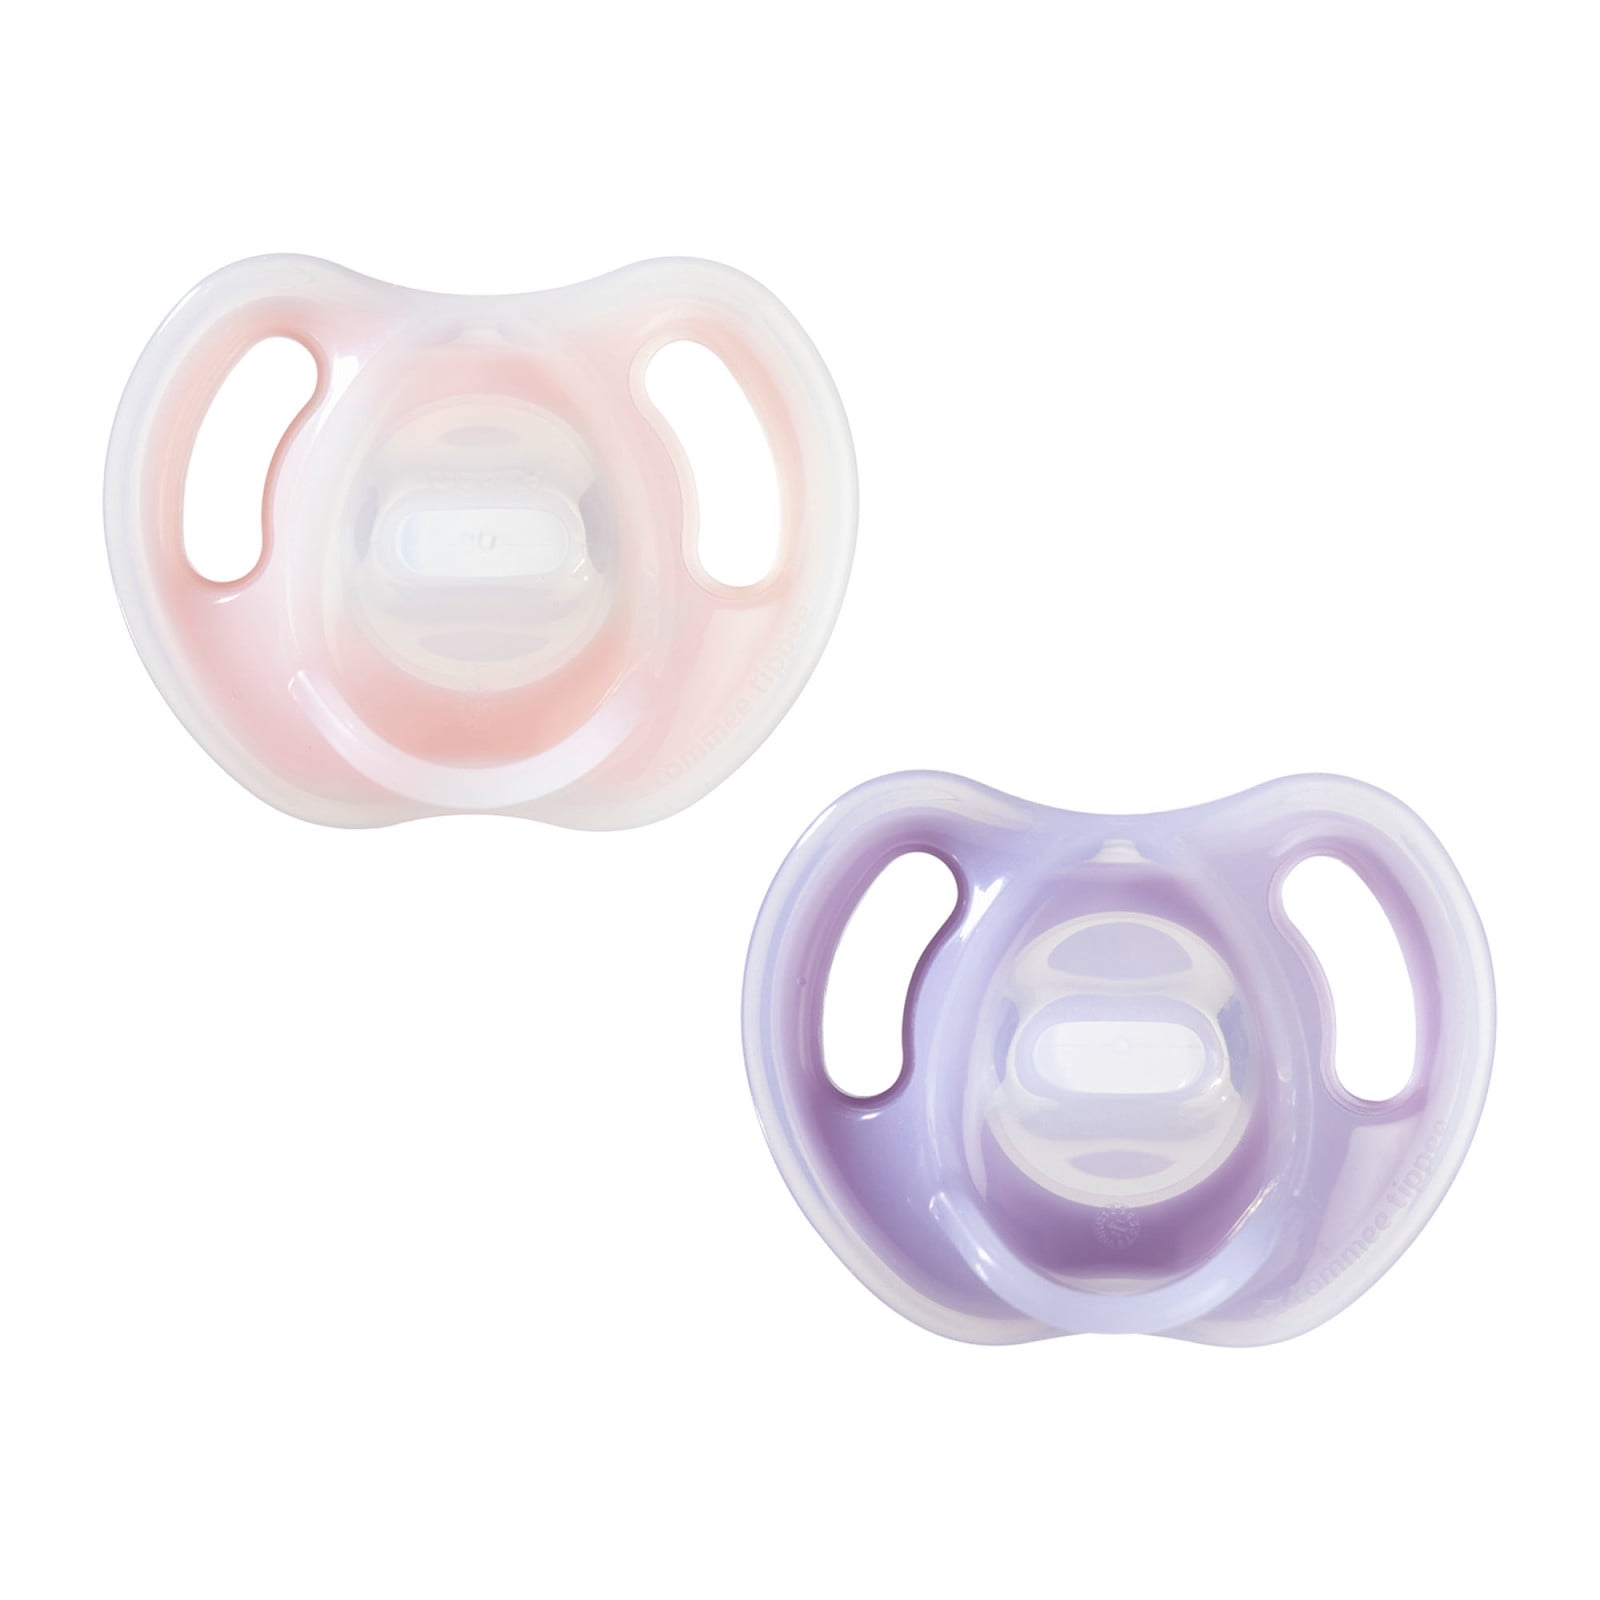 MAM Perfect Silicone Pacifier (2-6 Months) - 1 pcs (Assorted Colours)  /Puting Silikon Bayi (2-6